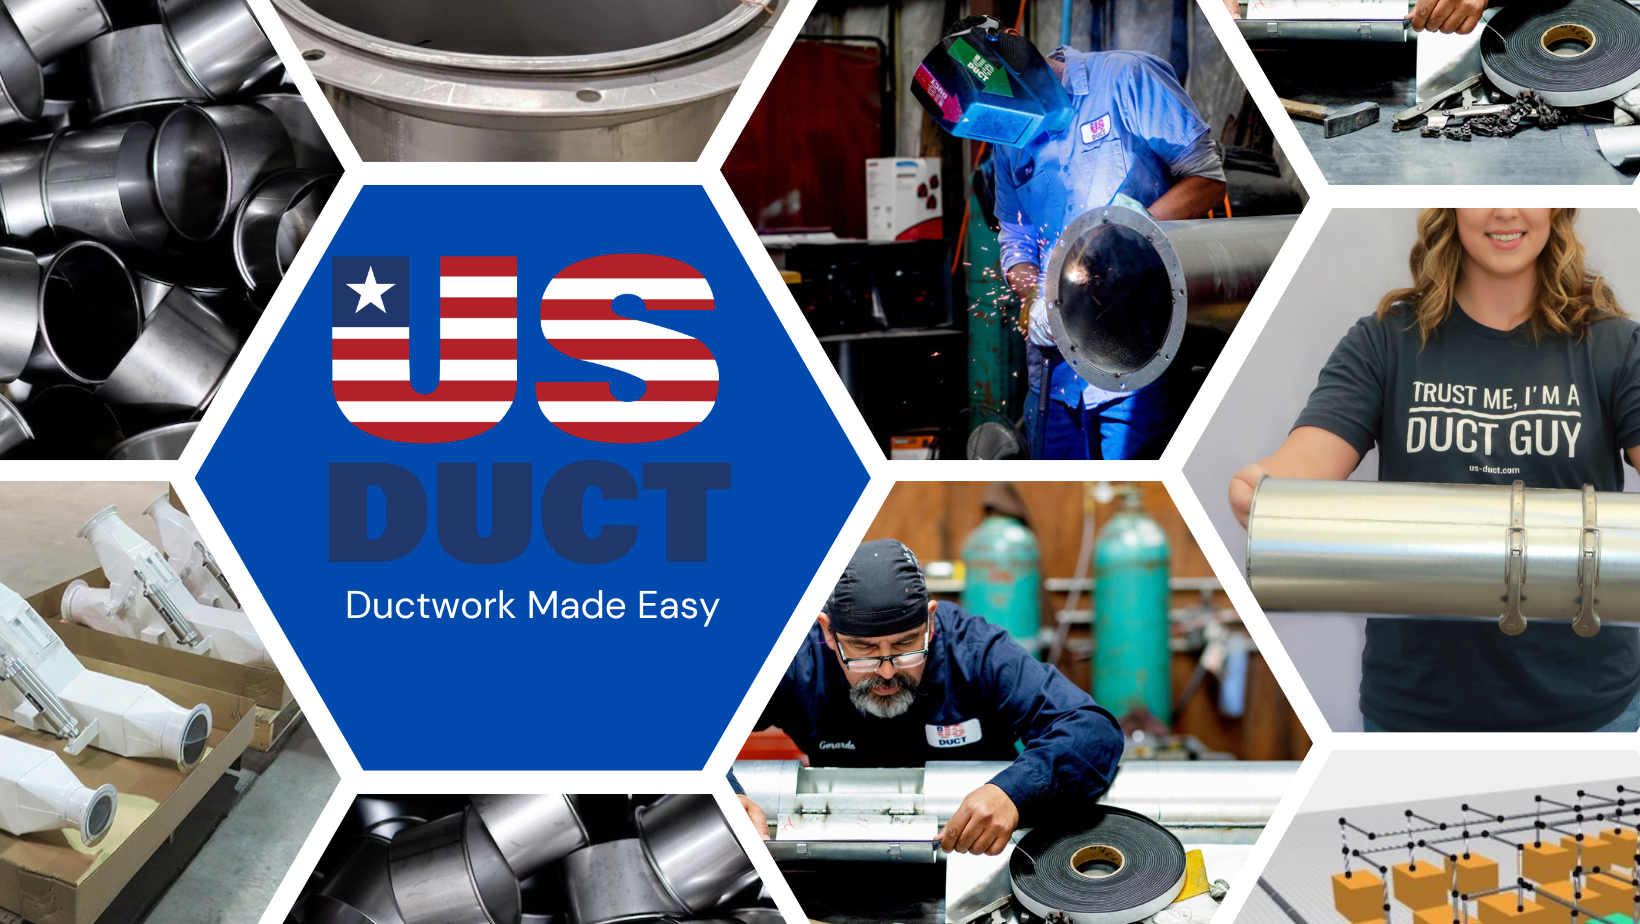 US Duct logo and product image